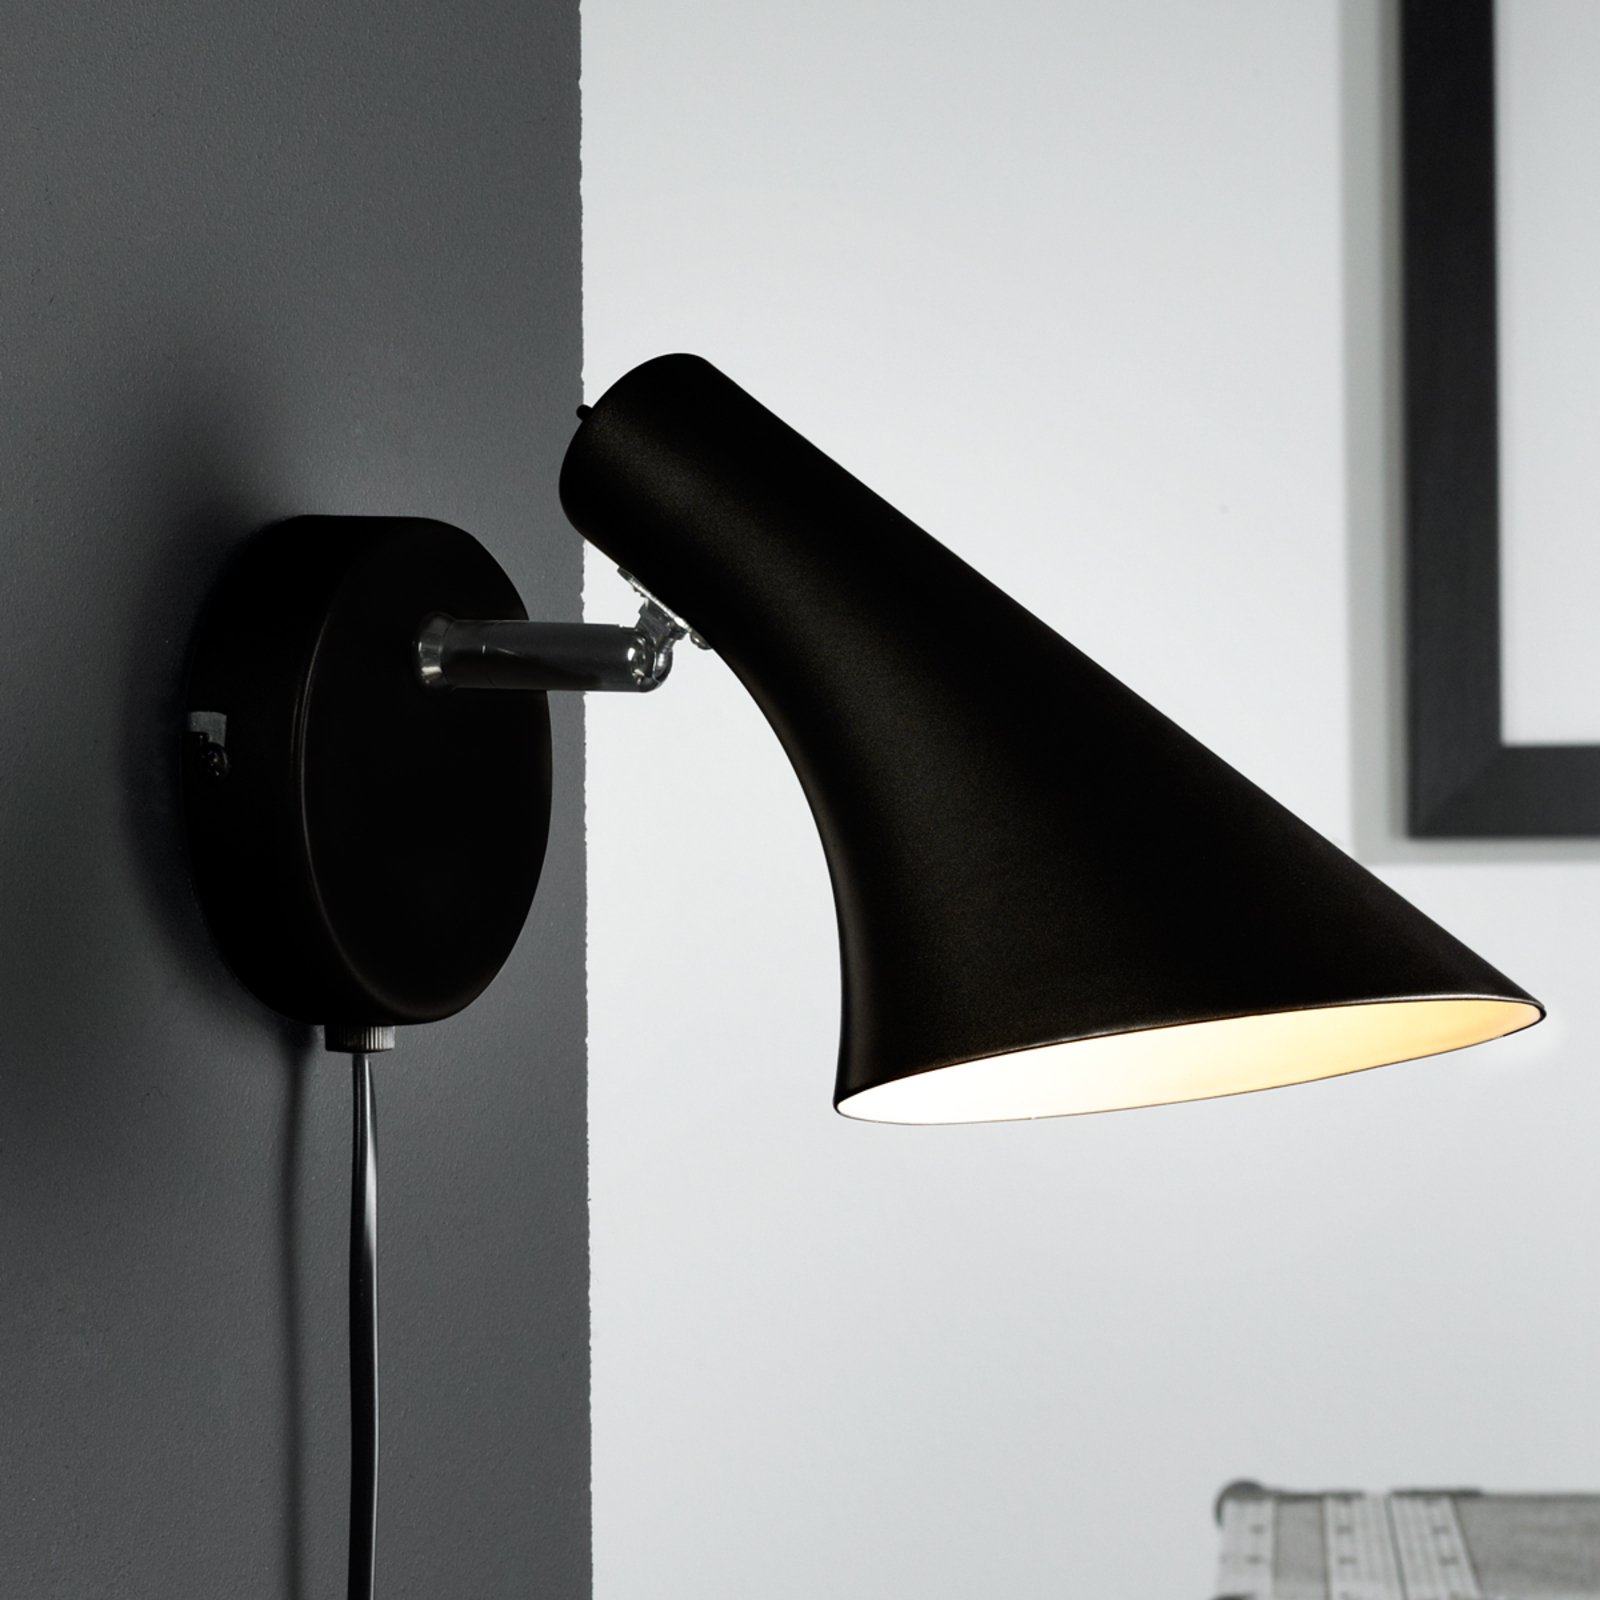 Vanilla wall lamp, switch, plug-in cable, black